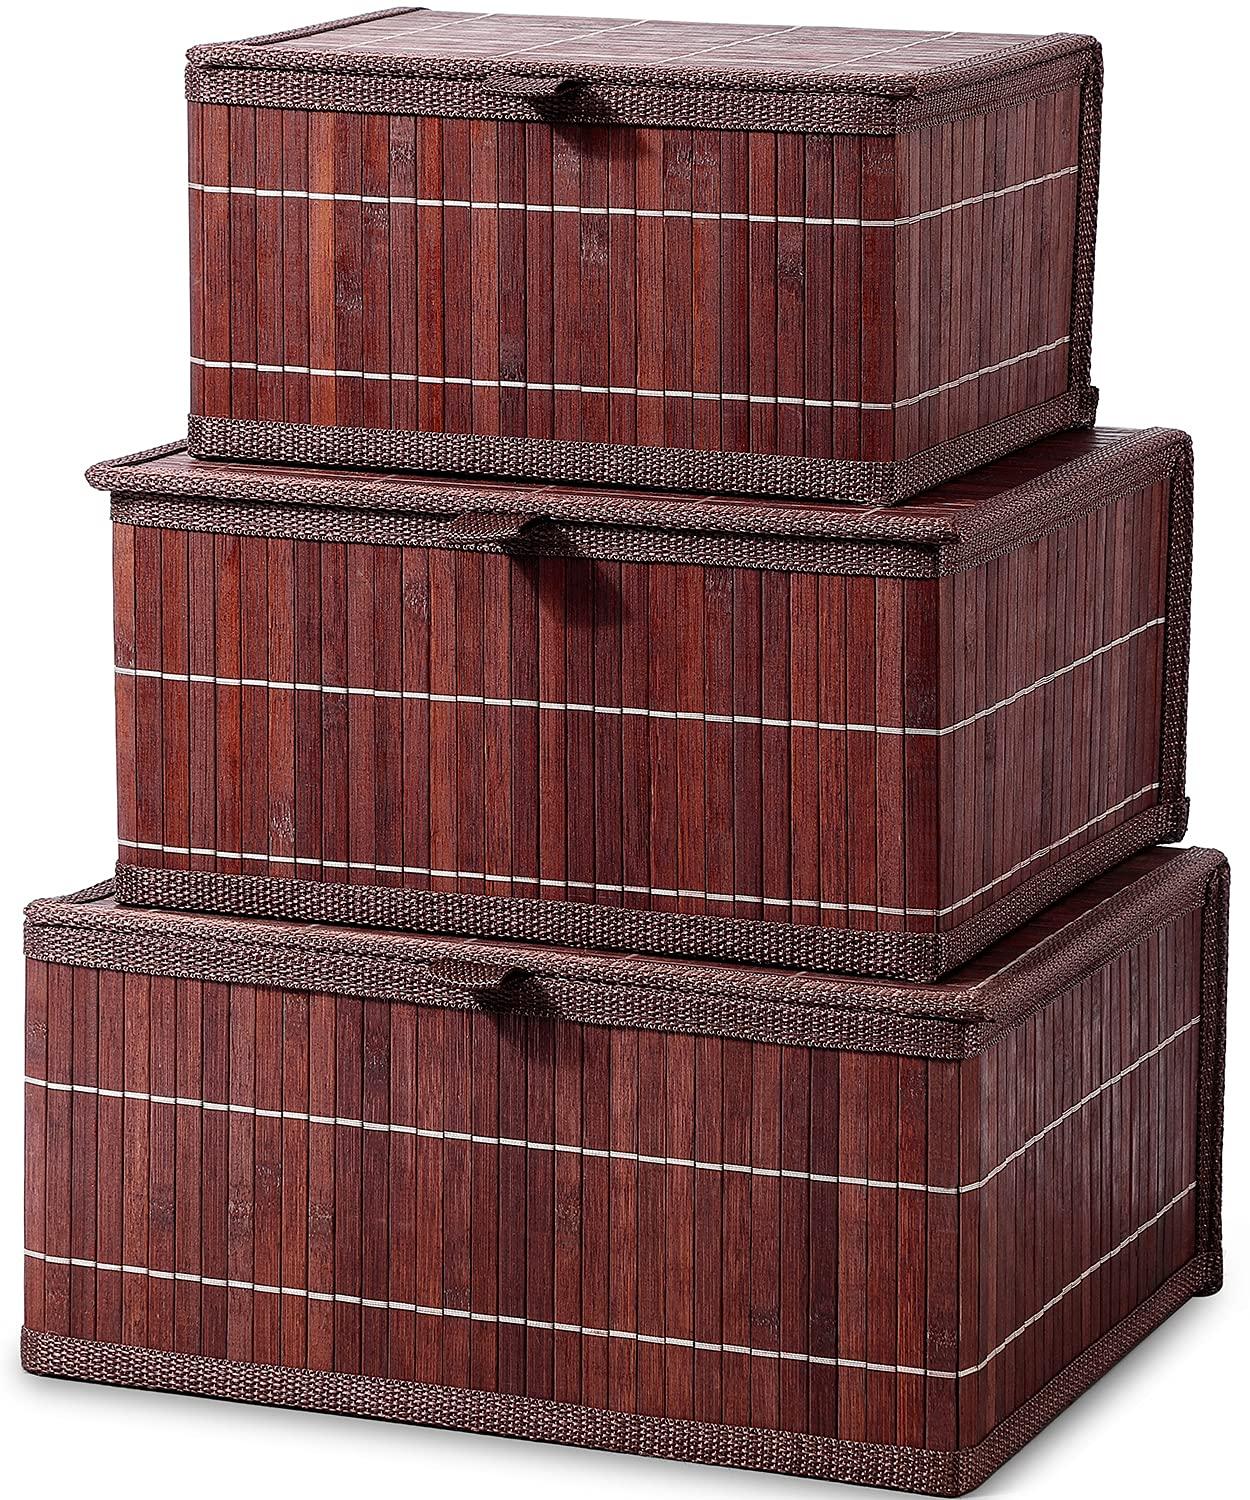 Honygebia Bamboo Decorative Storage Boxes - Set of 3 Woven Lined Storage Basket with Lids, Retro Brown Wicker Lidded Baskets for Home Kitchen Shelf Organizer Decor